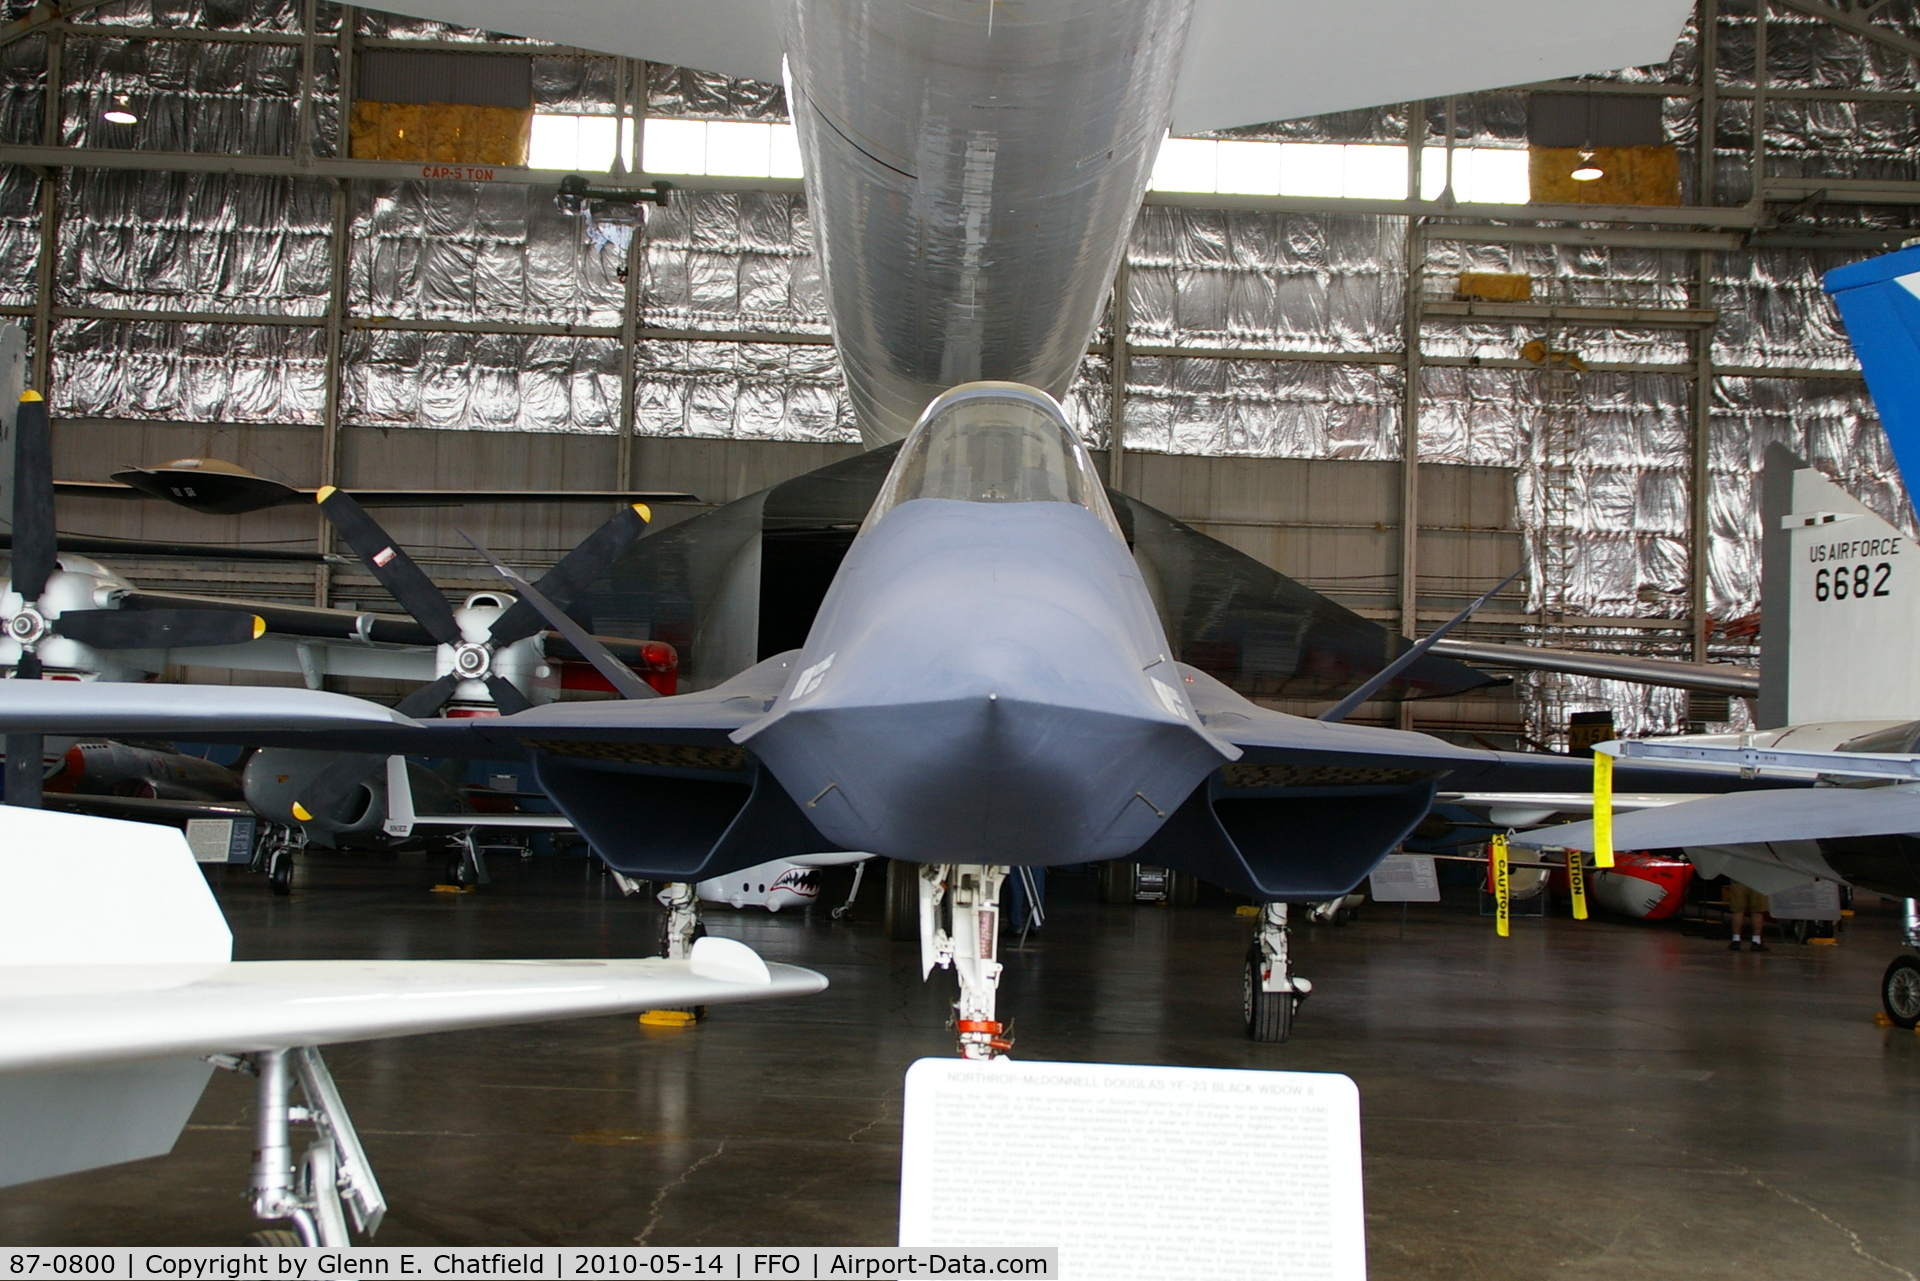 87-0800, 1990 Northrop YF-23A C/N PAV-1, In the R&D hangar of the National Museum of the USAF.